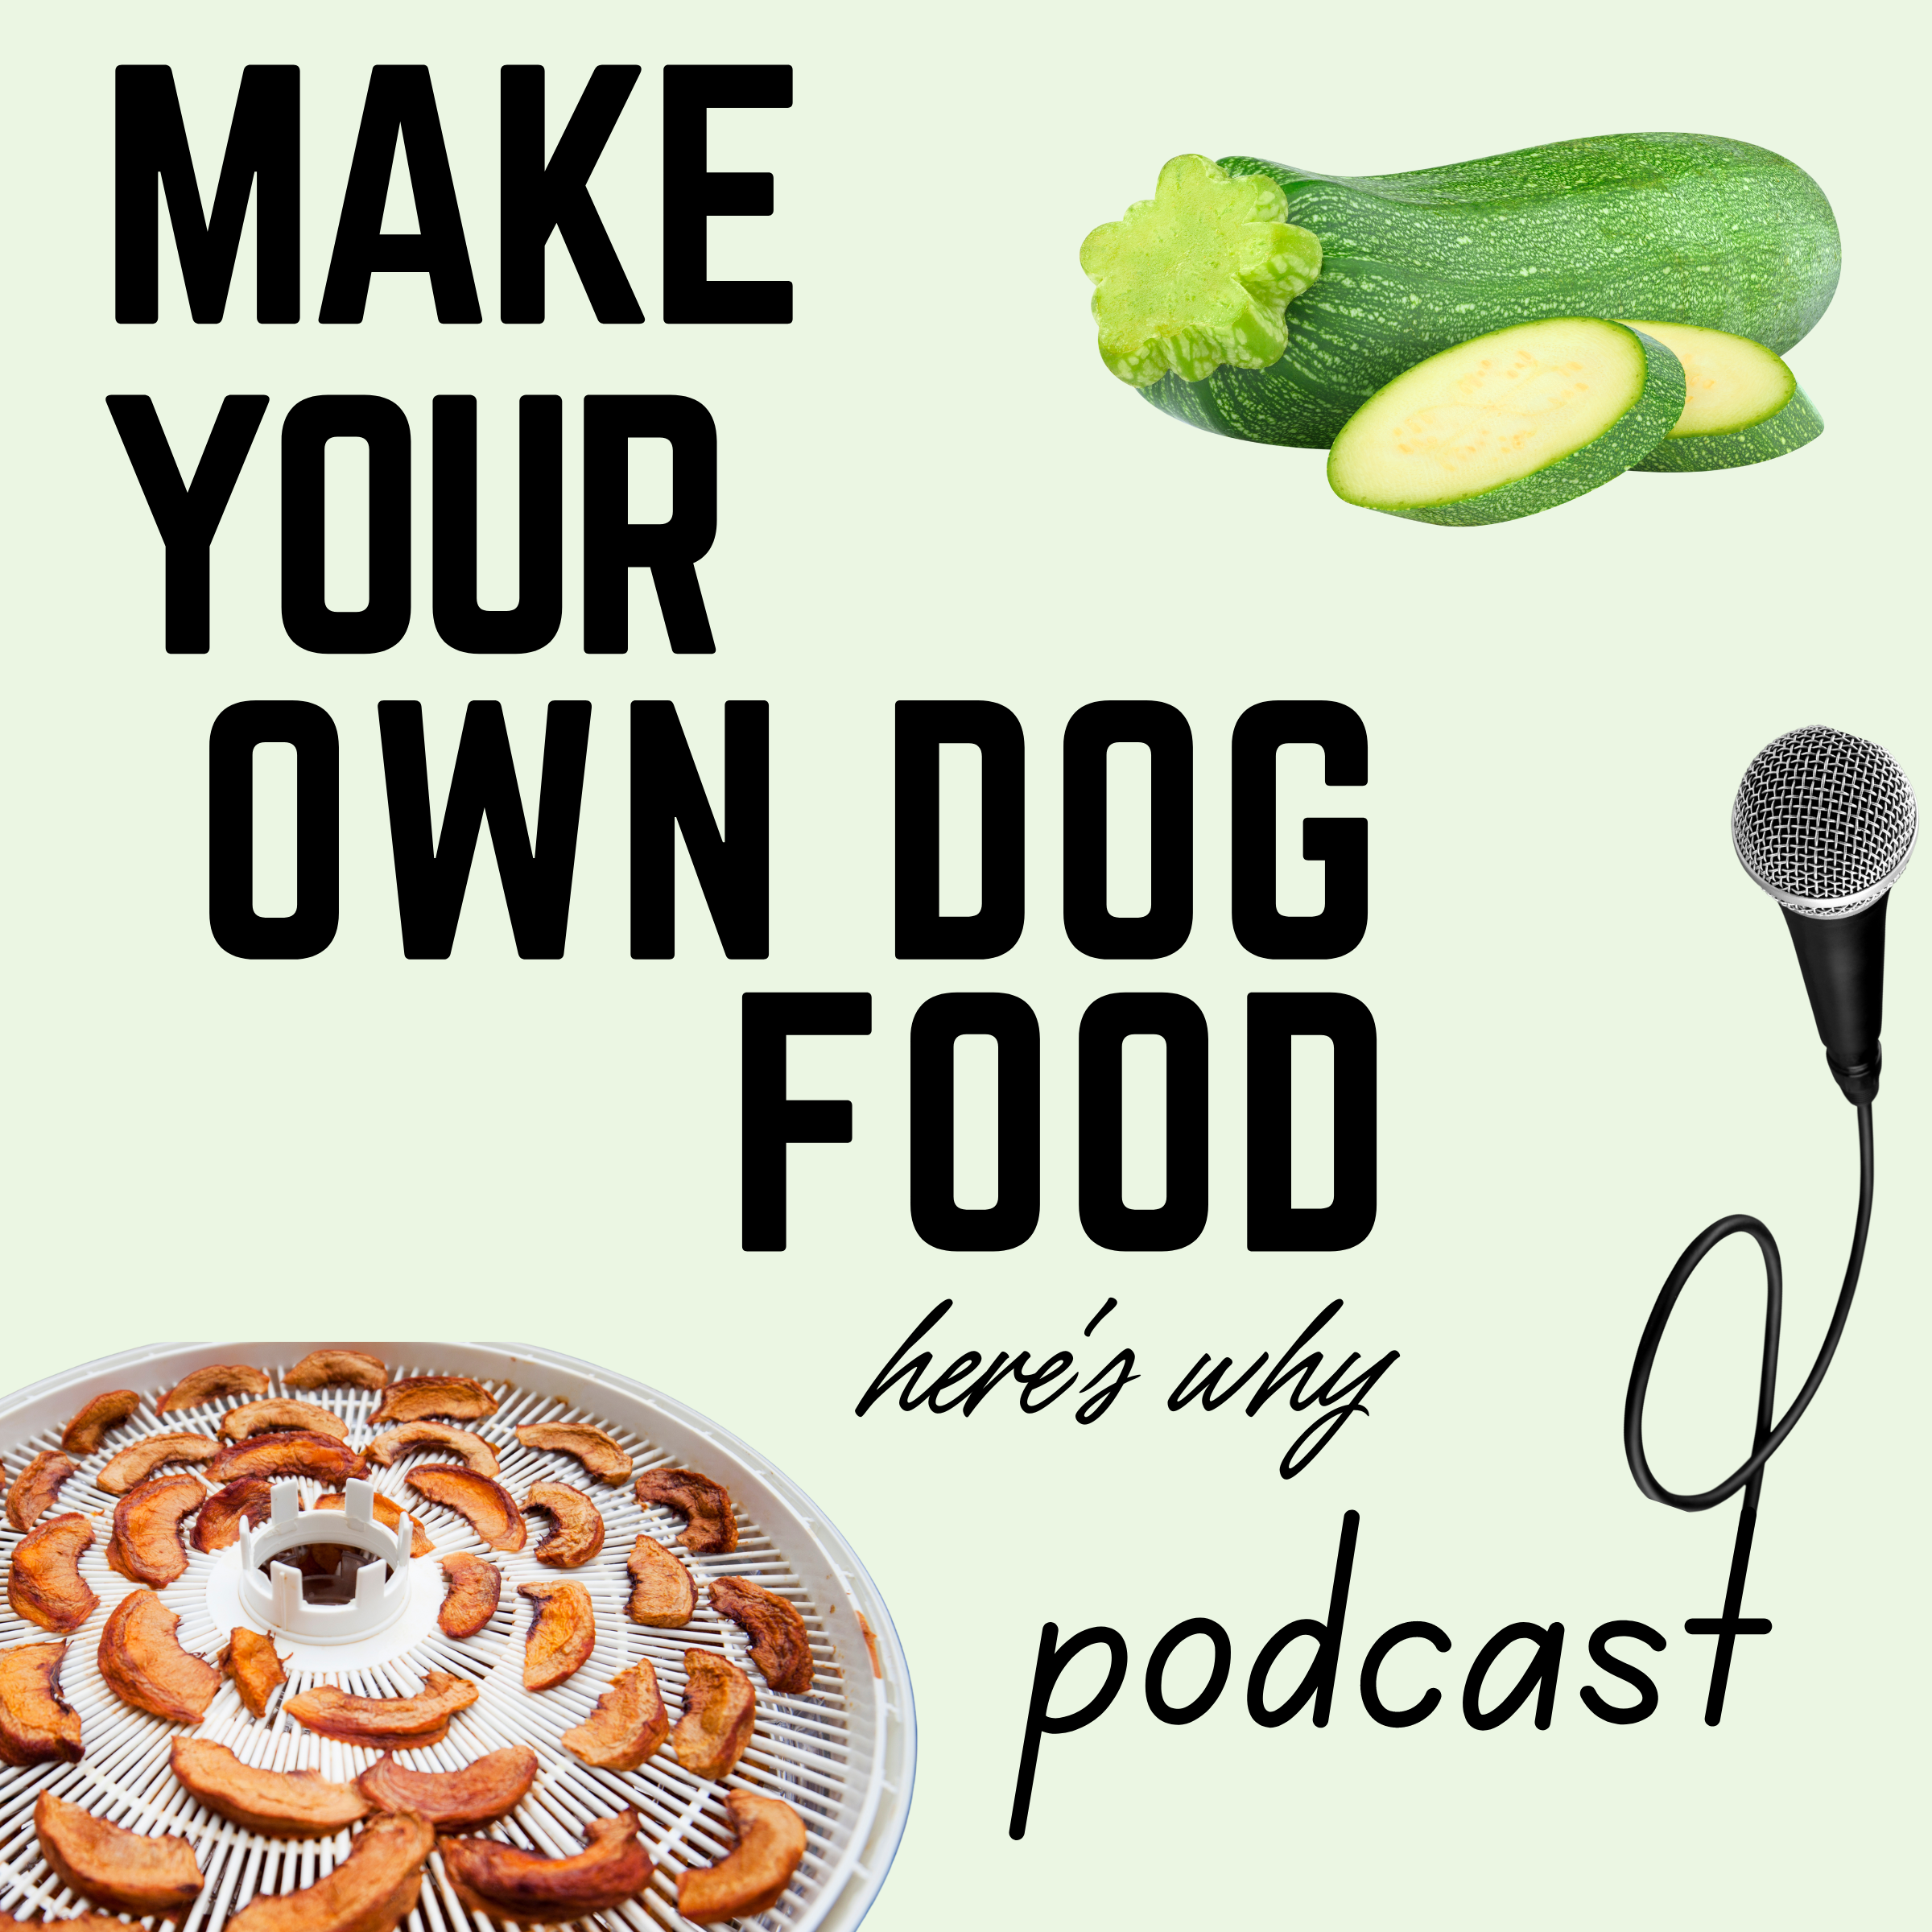 Podcast Make Your Own Dog Food - Here's Why